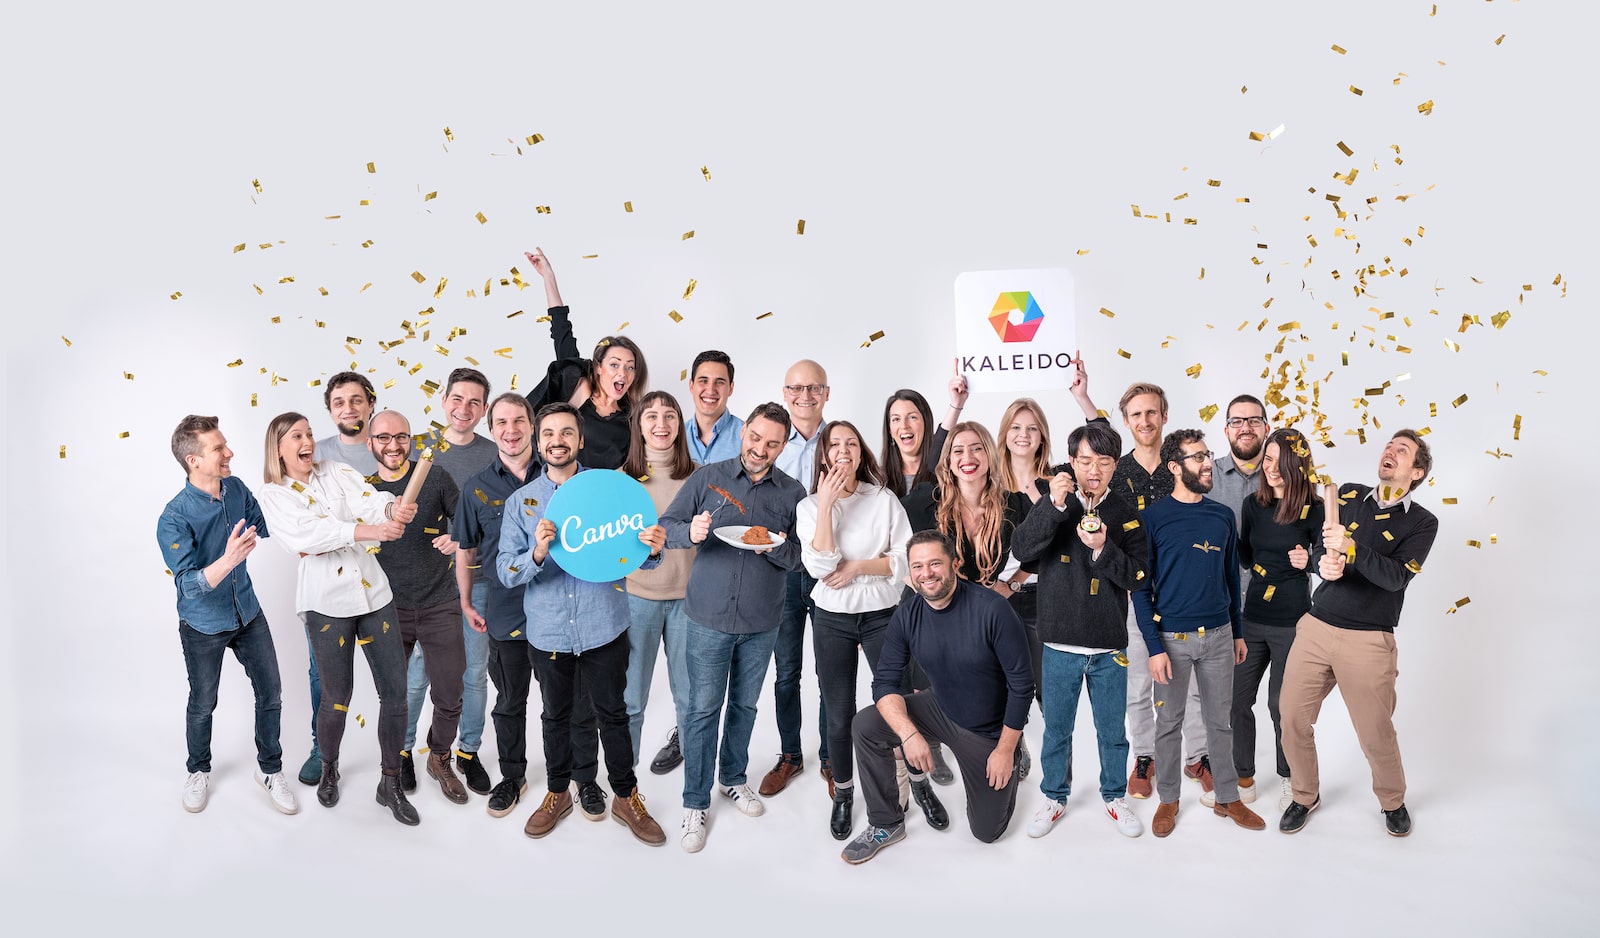 The team at kaleido celebrating their acquisition - each member has been digitally added.